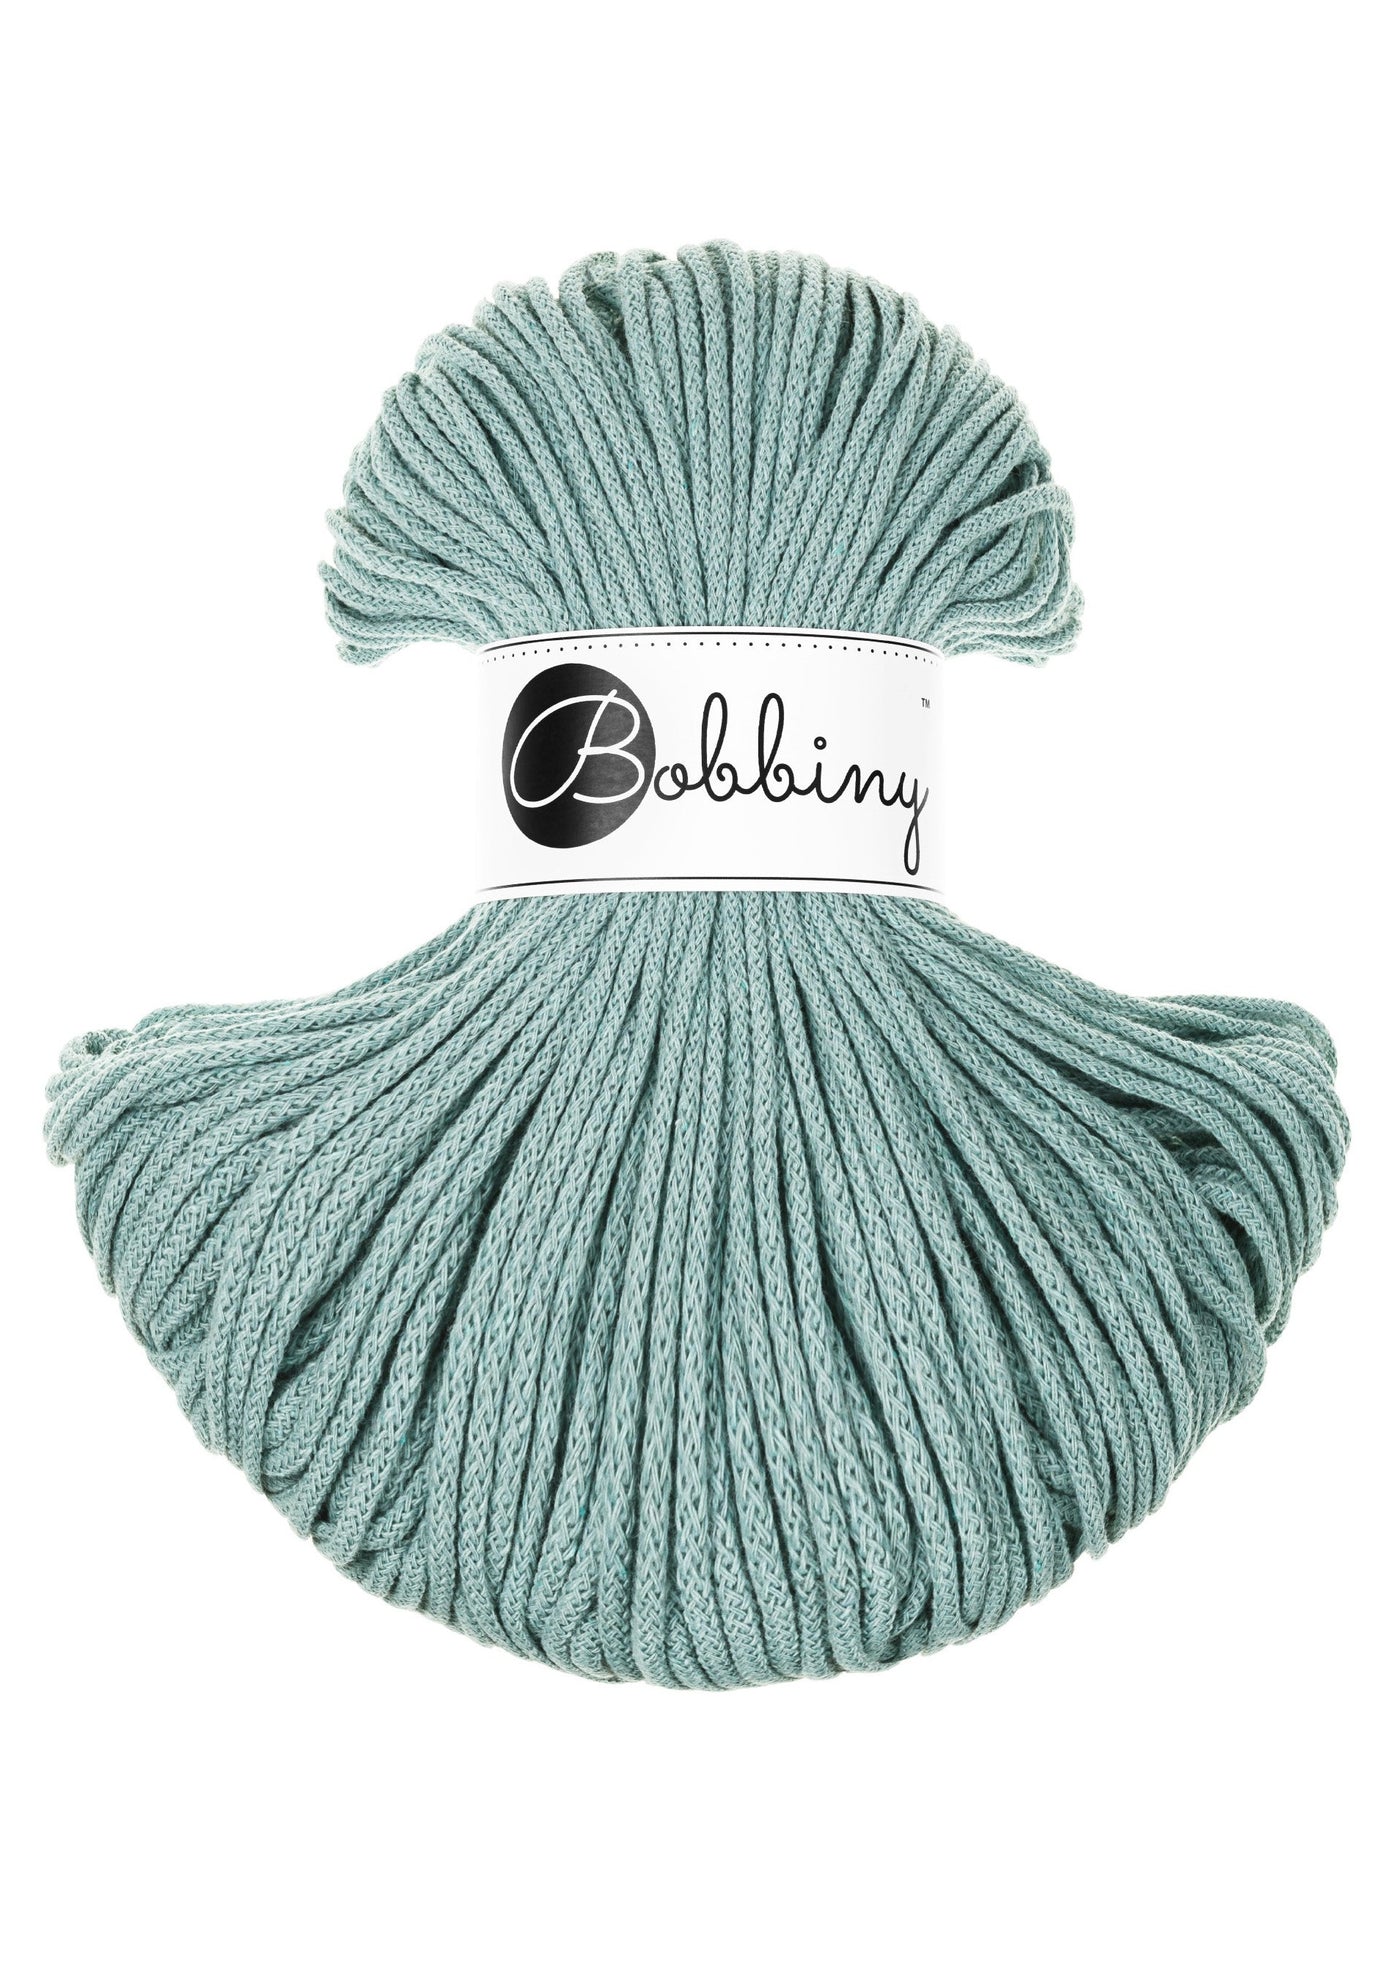 Bobbiny braided cord in 3mm width in duck egg blue shade 